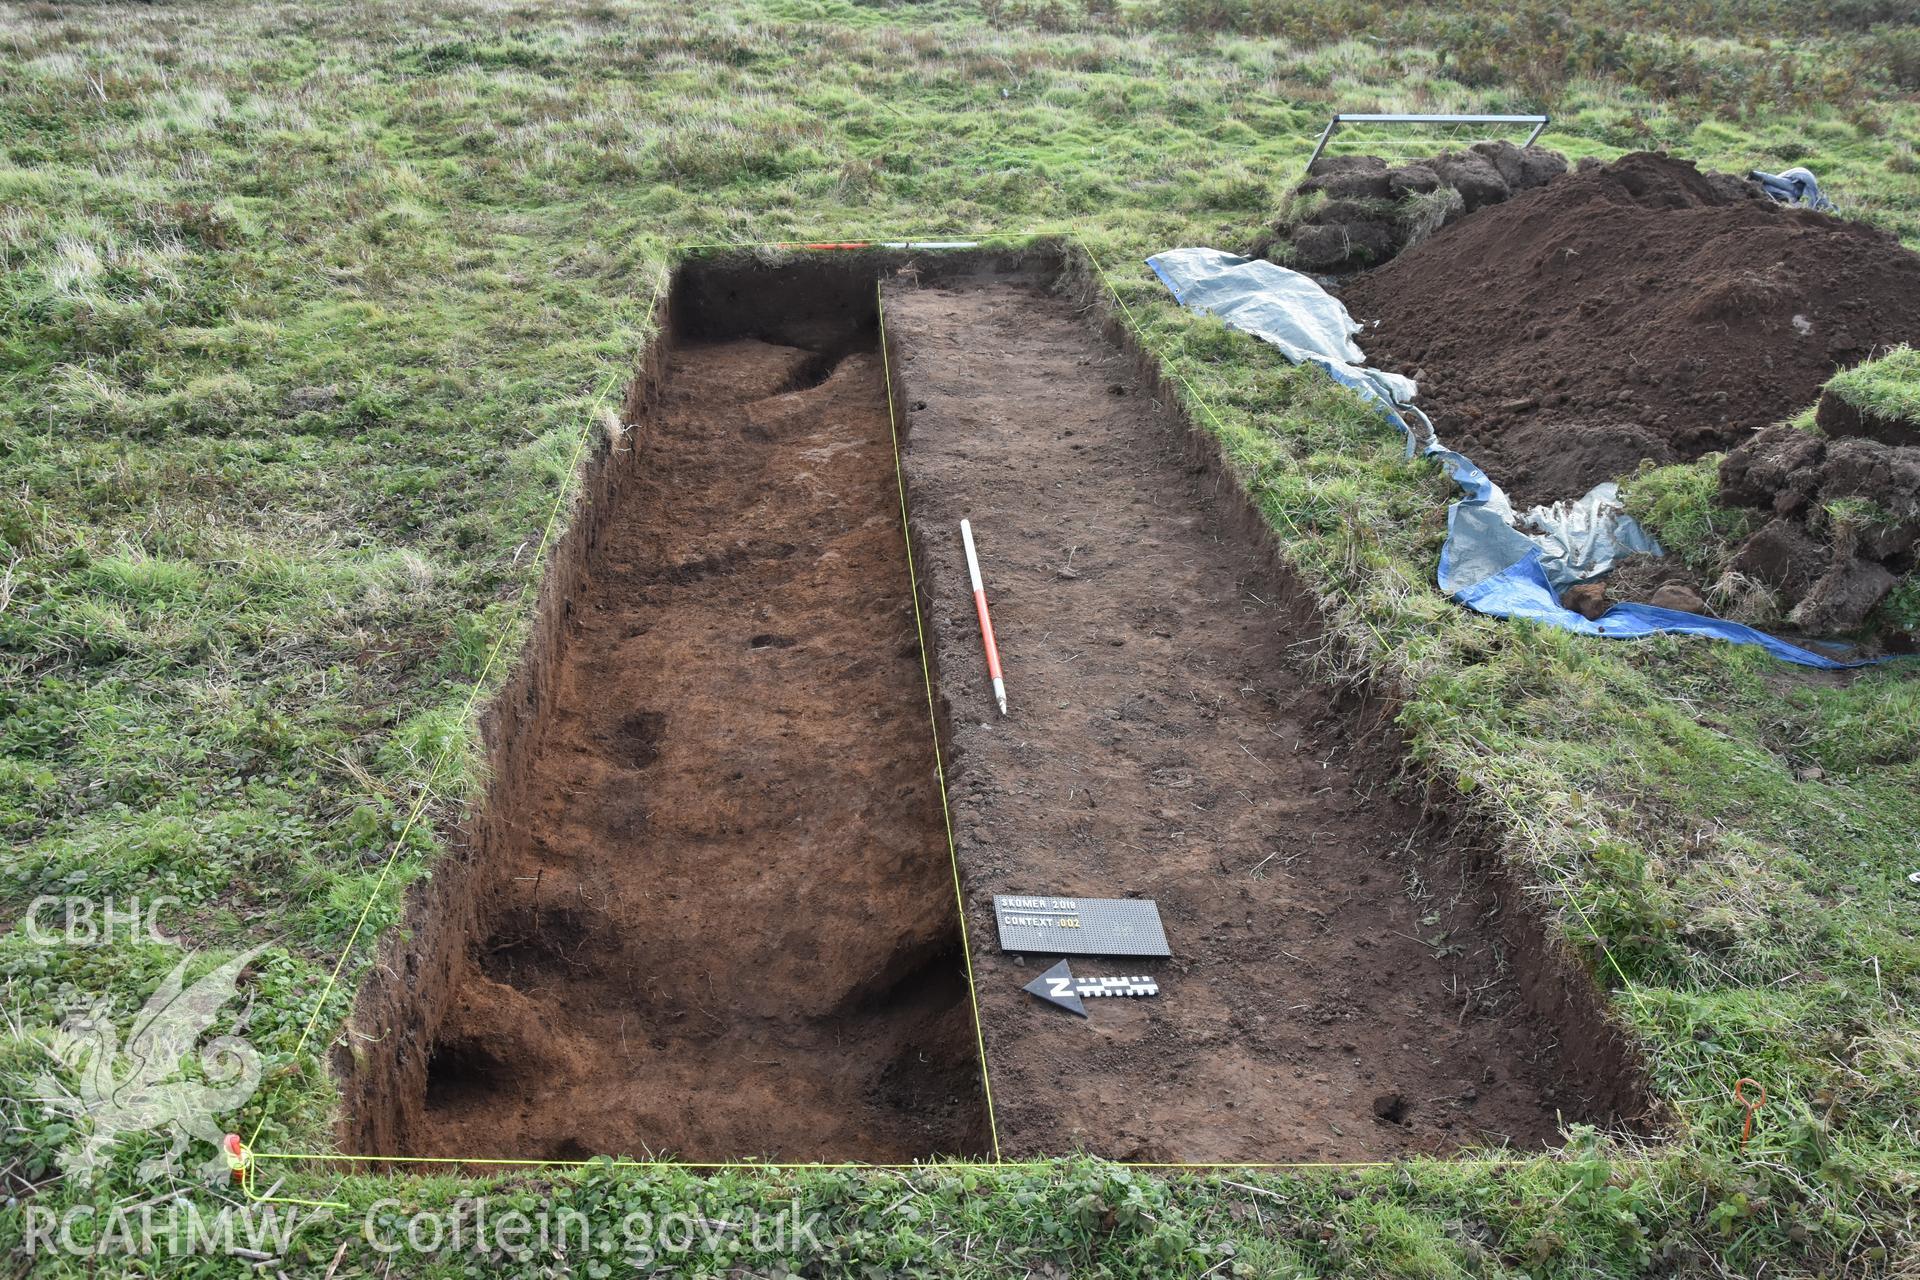 Investigator's photography showing the evaluation excavation of a geophysical anomaly in Well Meadow, Skomer Island, between 25-27th Sept 2018 as part of the Skomer Island Project. General view of trench from west with lower subsoil showing old warrens.